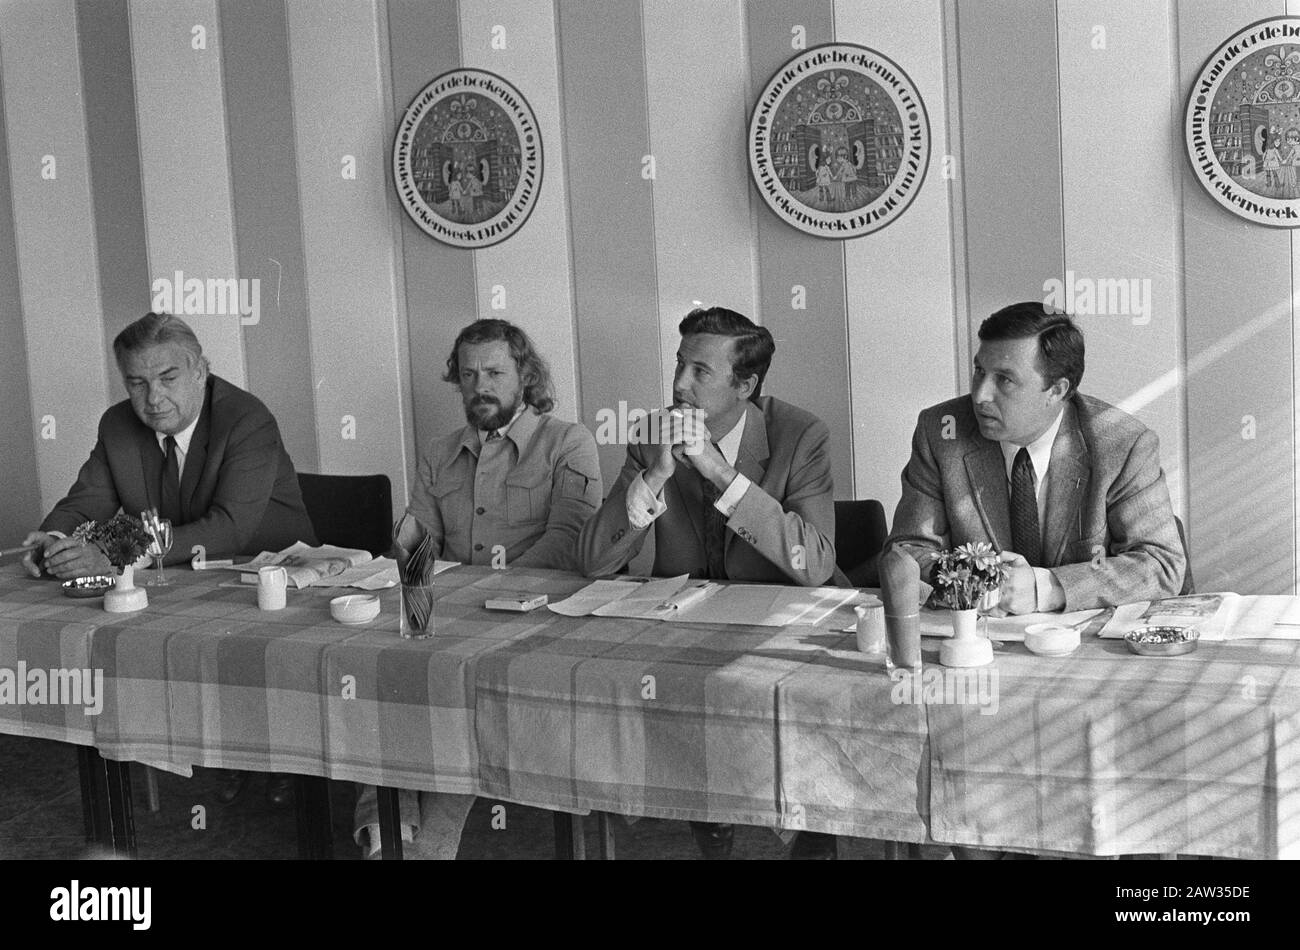 Children's Prize for 1971 announced, Amsterdam, v.l.n.r. W. J. Schouten, Hugo Raes, D. Cook, D. Ouwehand Date: October 5, 1971 Location: Amsterdam, Noord-Holland Keywords: prices Person Name: D. Cook, D. Ouwehand, Schouten, WJ Stock Photo